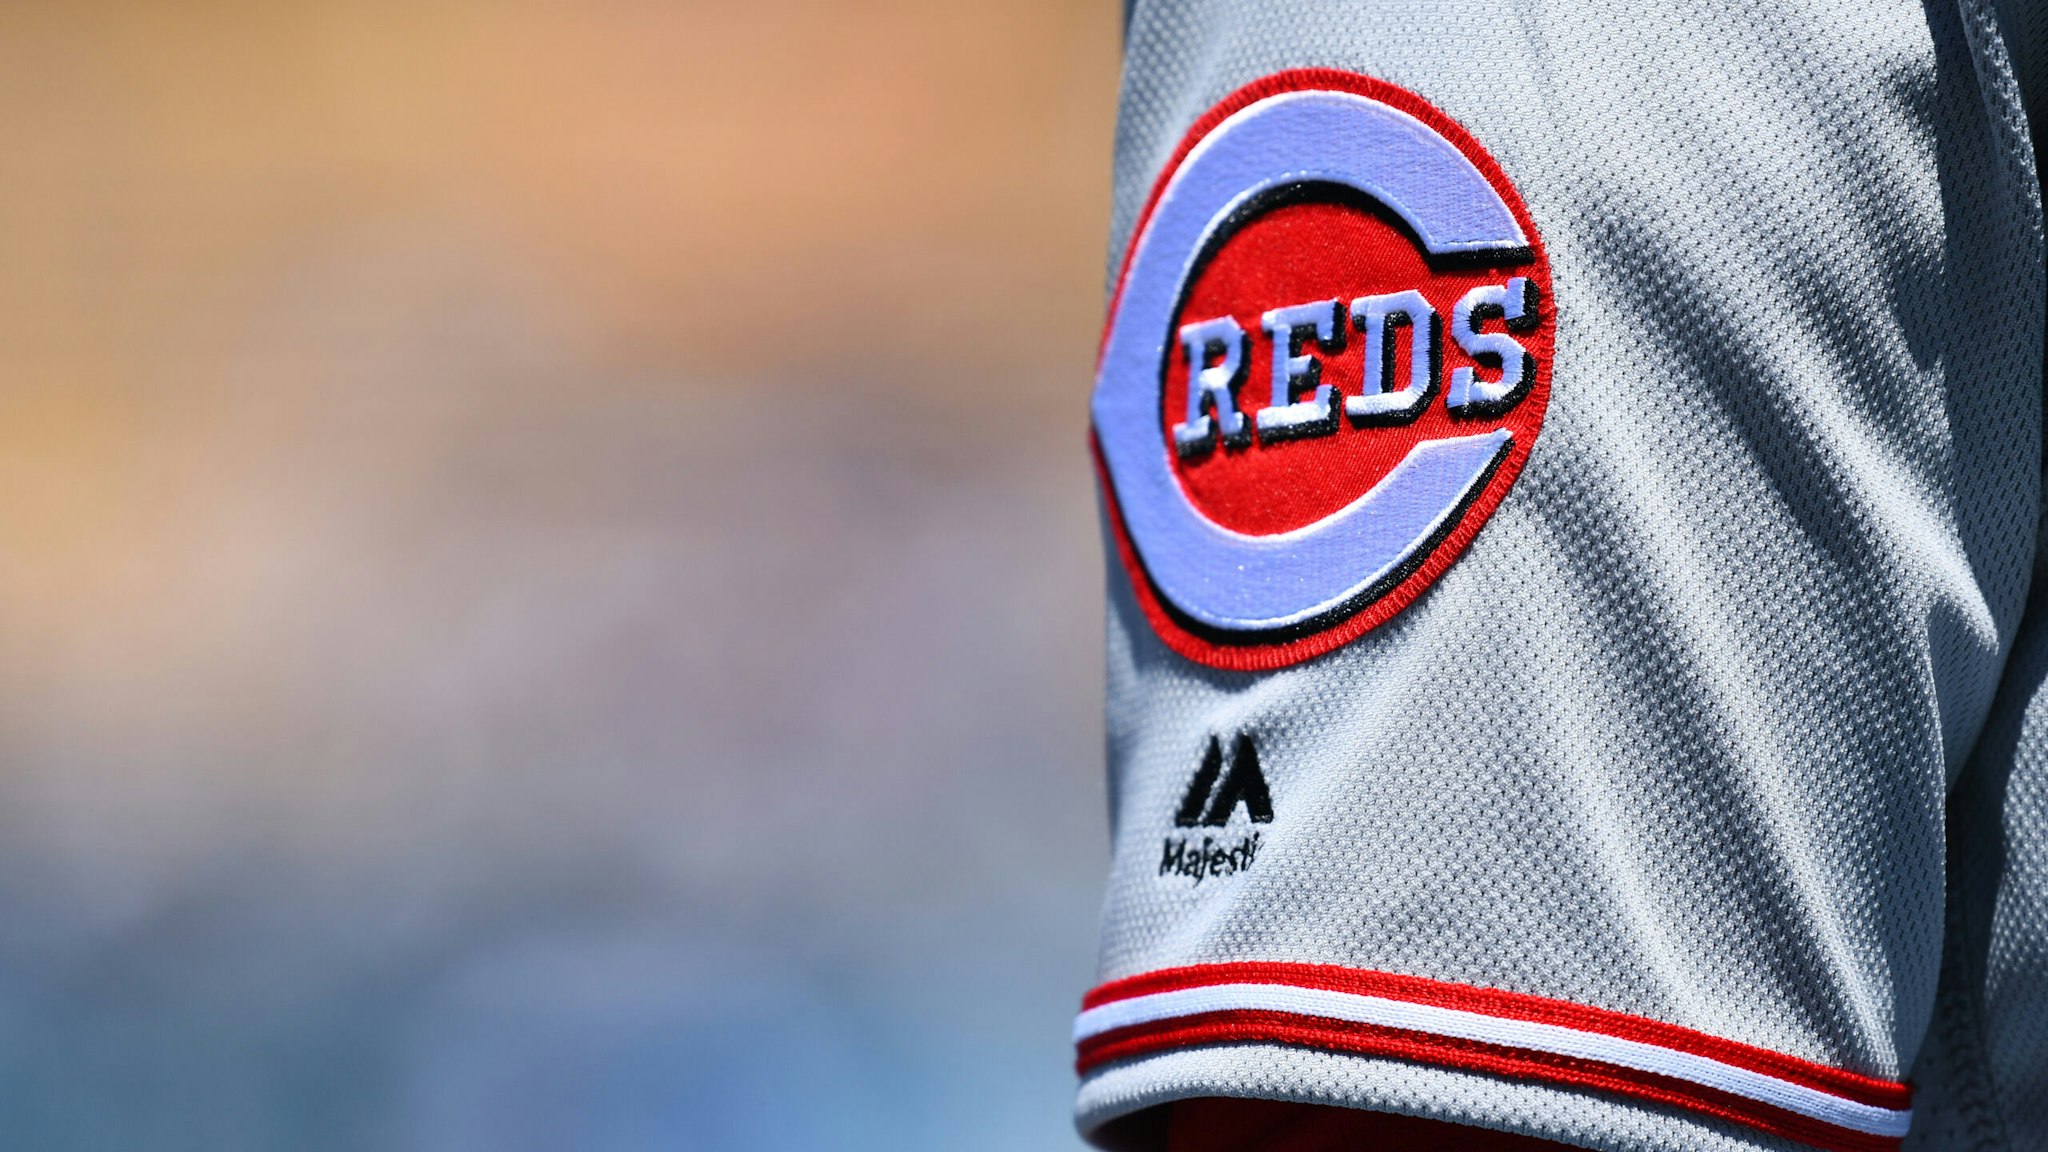 LOS ANGELES, CA - APRIL 17: The Cincinnati Reds logo on a jersey during a MLB game between the Cincinnati Reds and the Los Angeles Dodgers on April 17, 2019 at Dodger Stadium in Los Angeles, CA. (Photo by Brian Rothmuller/Icon Sportswire via Getty Images)